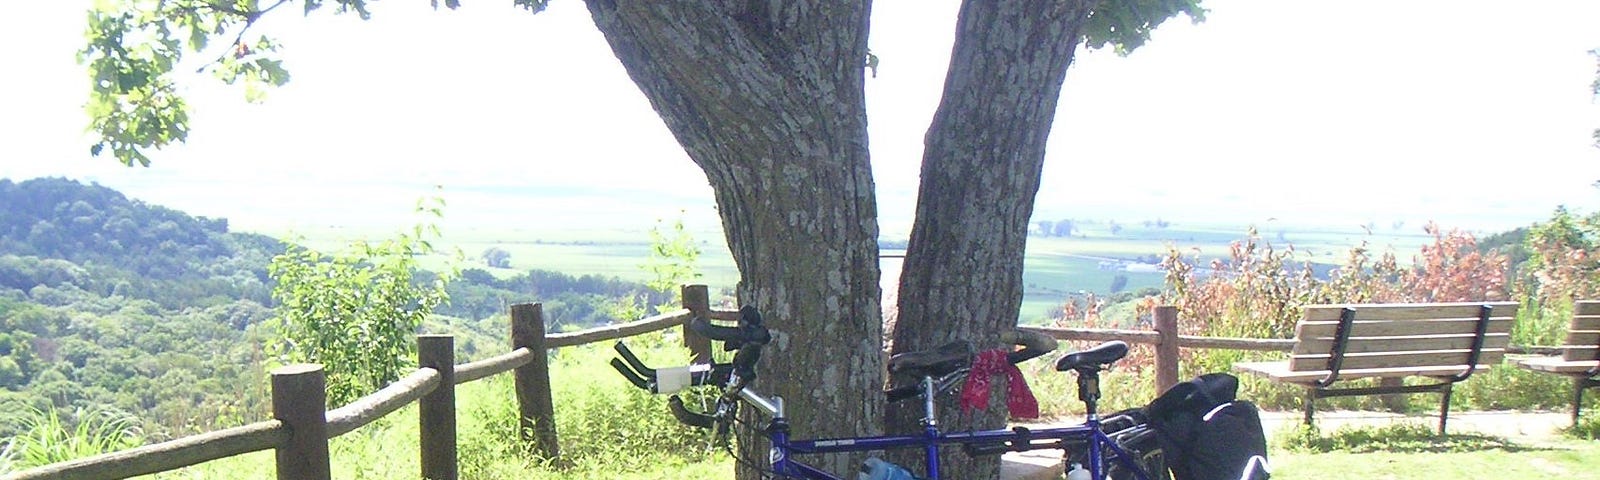 A bicycle built for two on the grass, leaning against a tree. In the background are wooden fence, a valley, and tree-covered hills